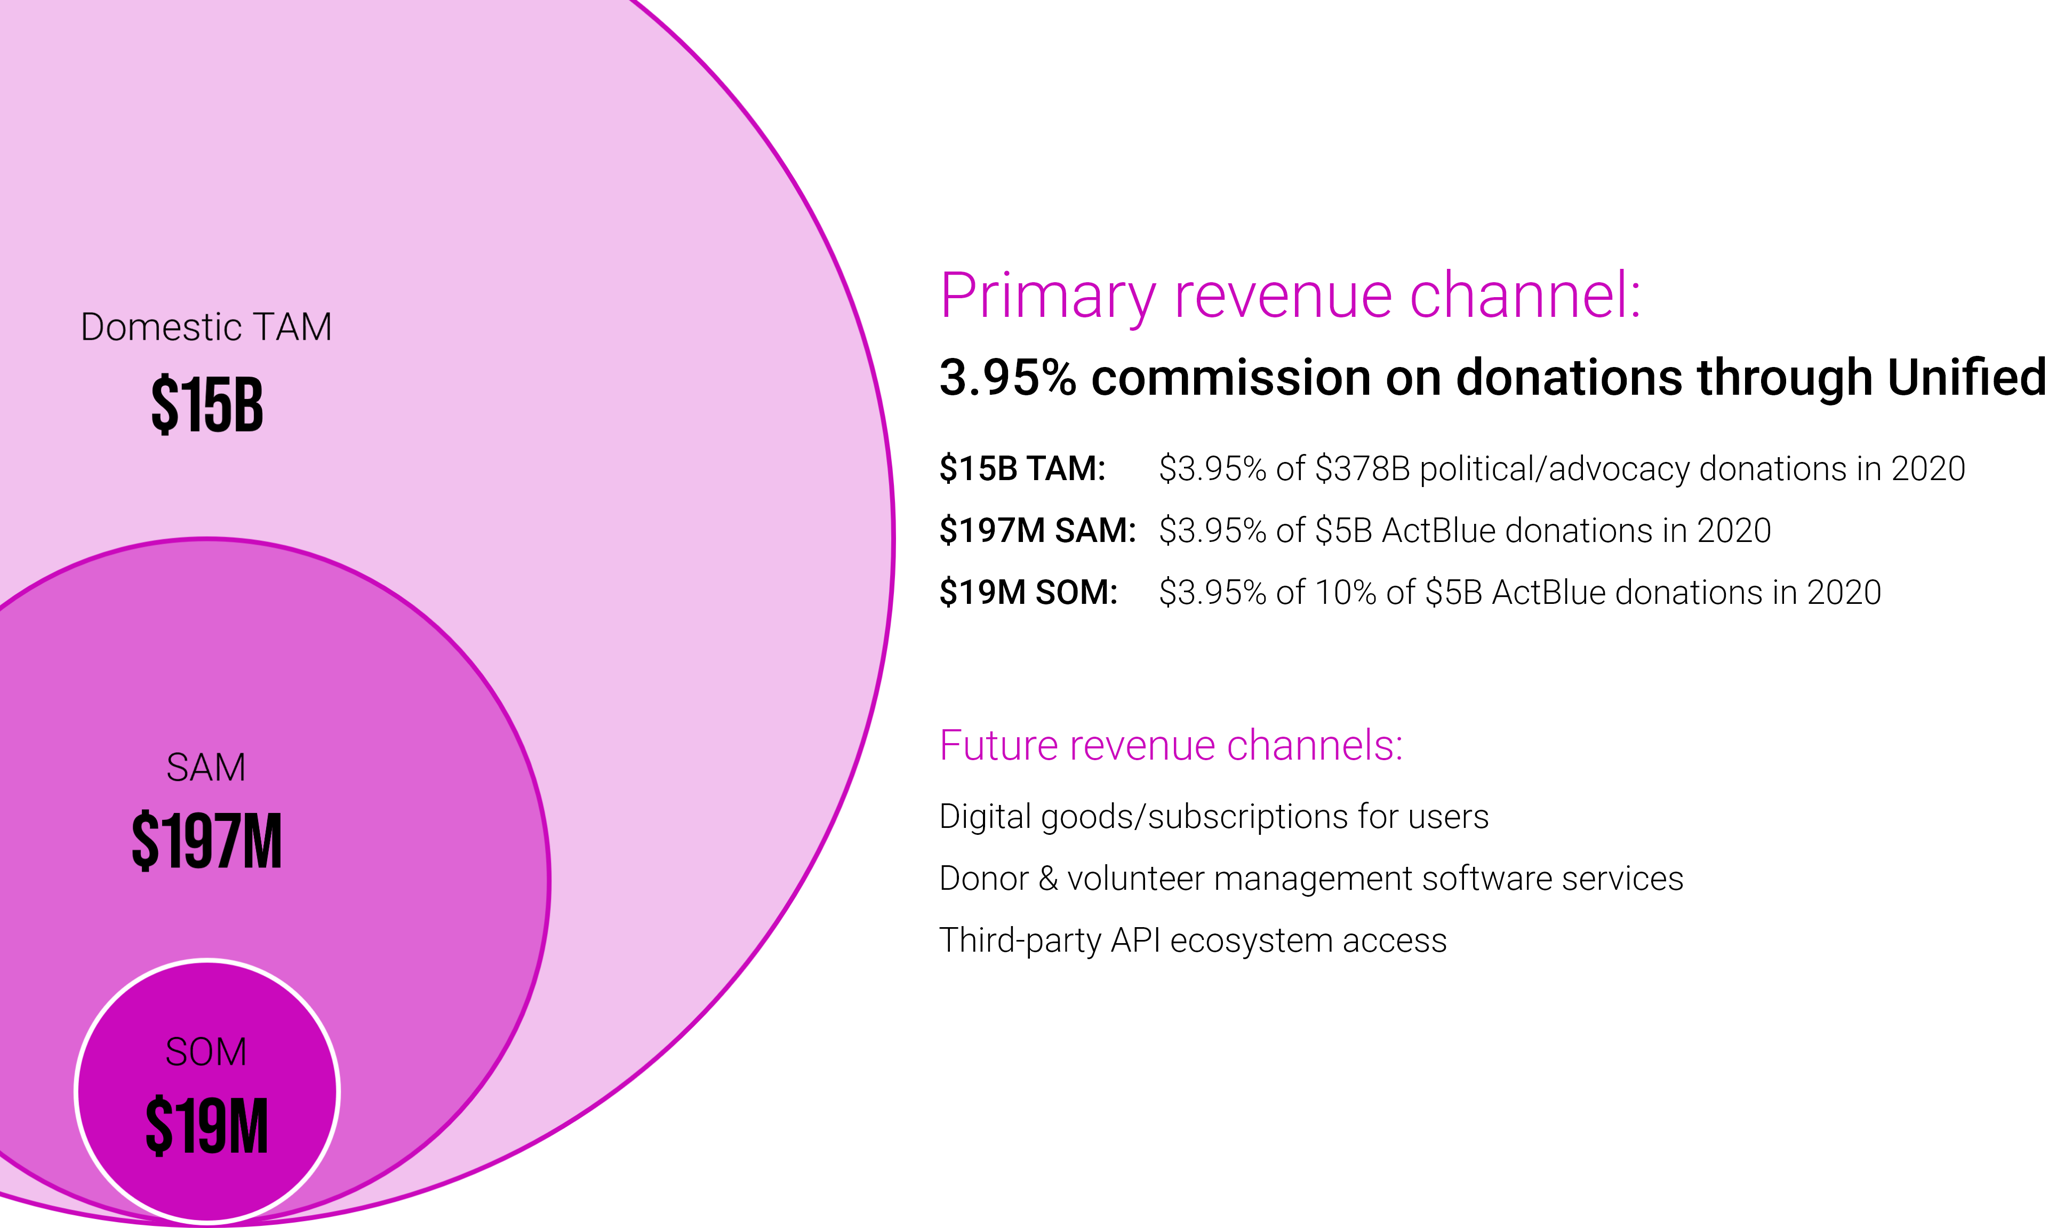 Our revenue will come through a 3.95% commission on all donations handled directly through Unified.  This creates a $15B total addressable market.